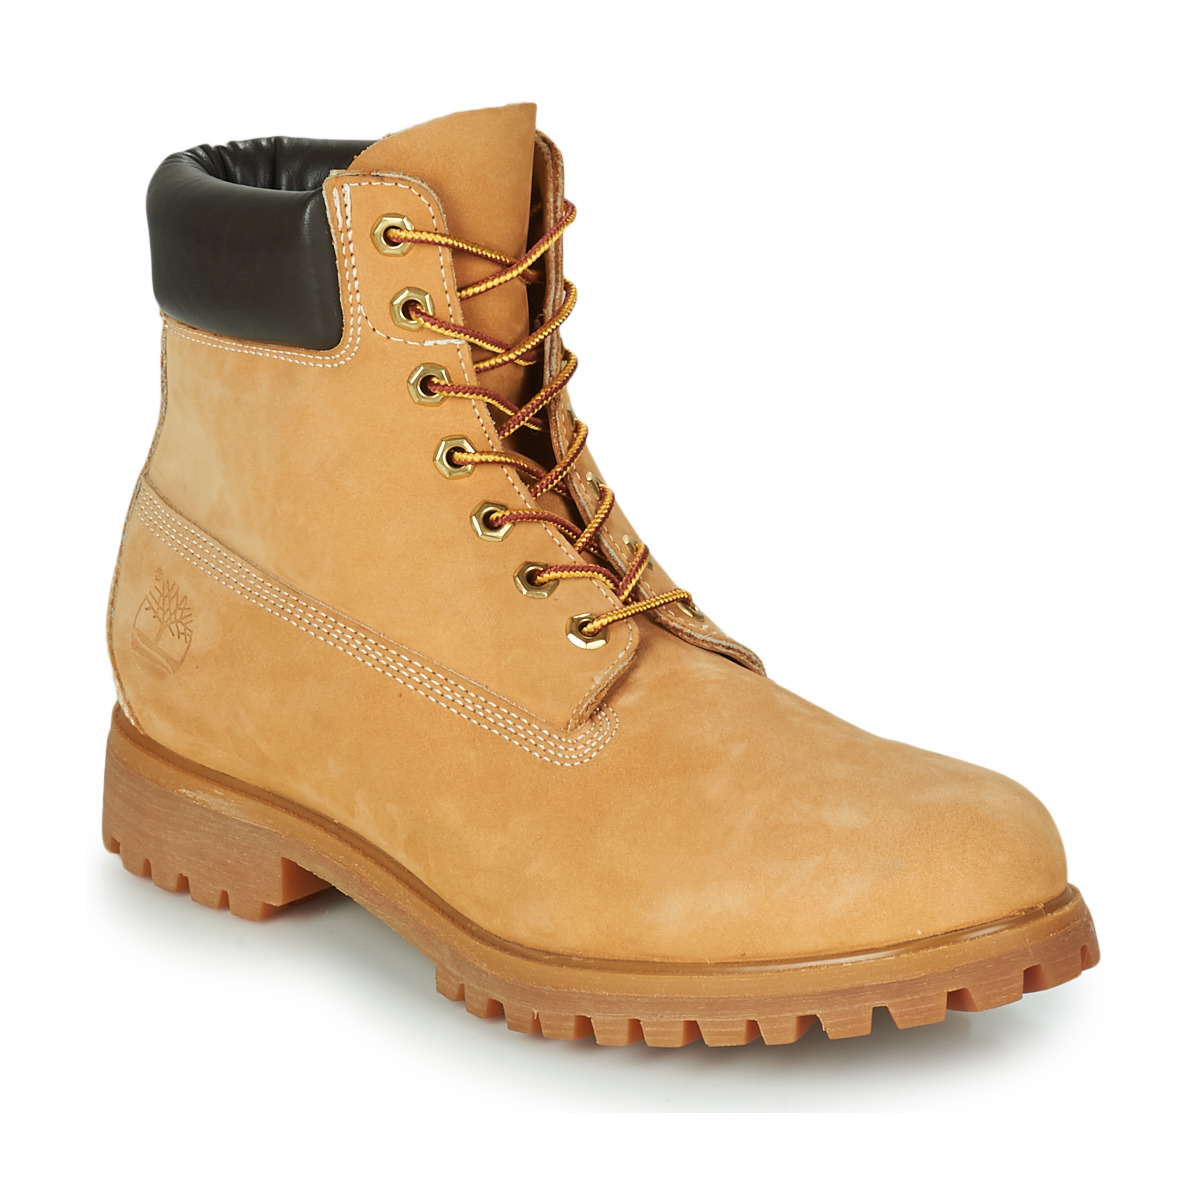 Timberland PREMIUM BOOT 6'' Wheat - Free delivery | Spartoo NET